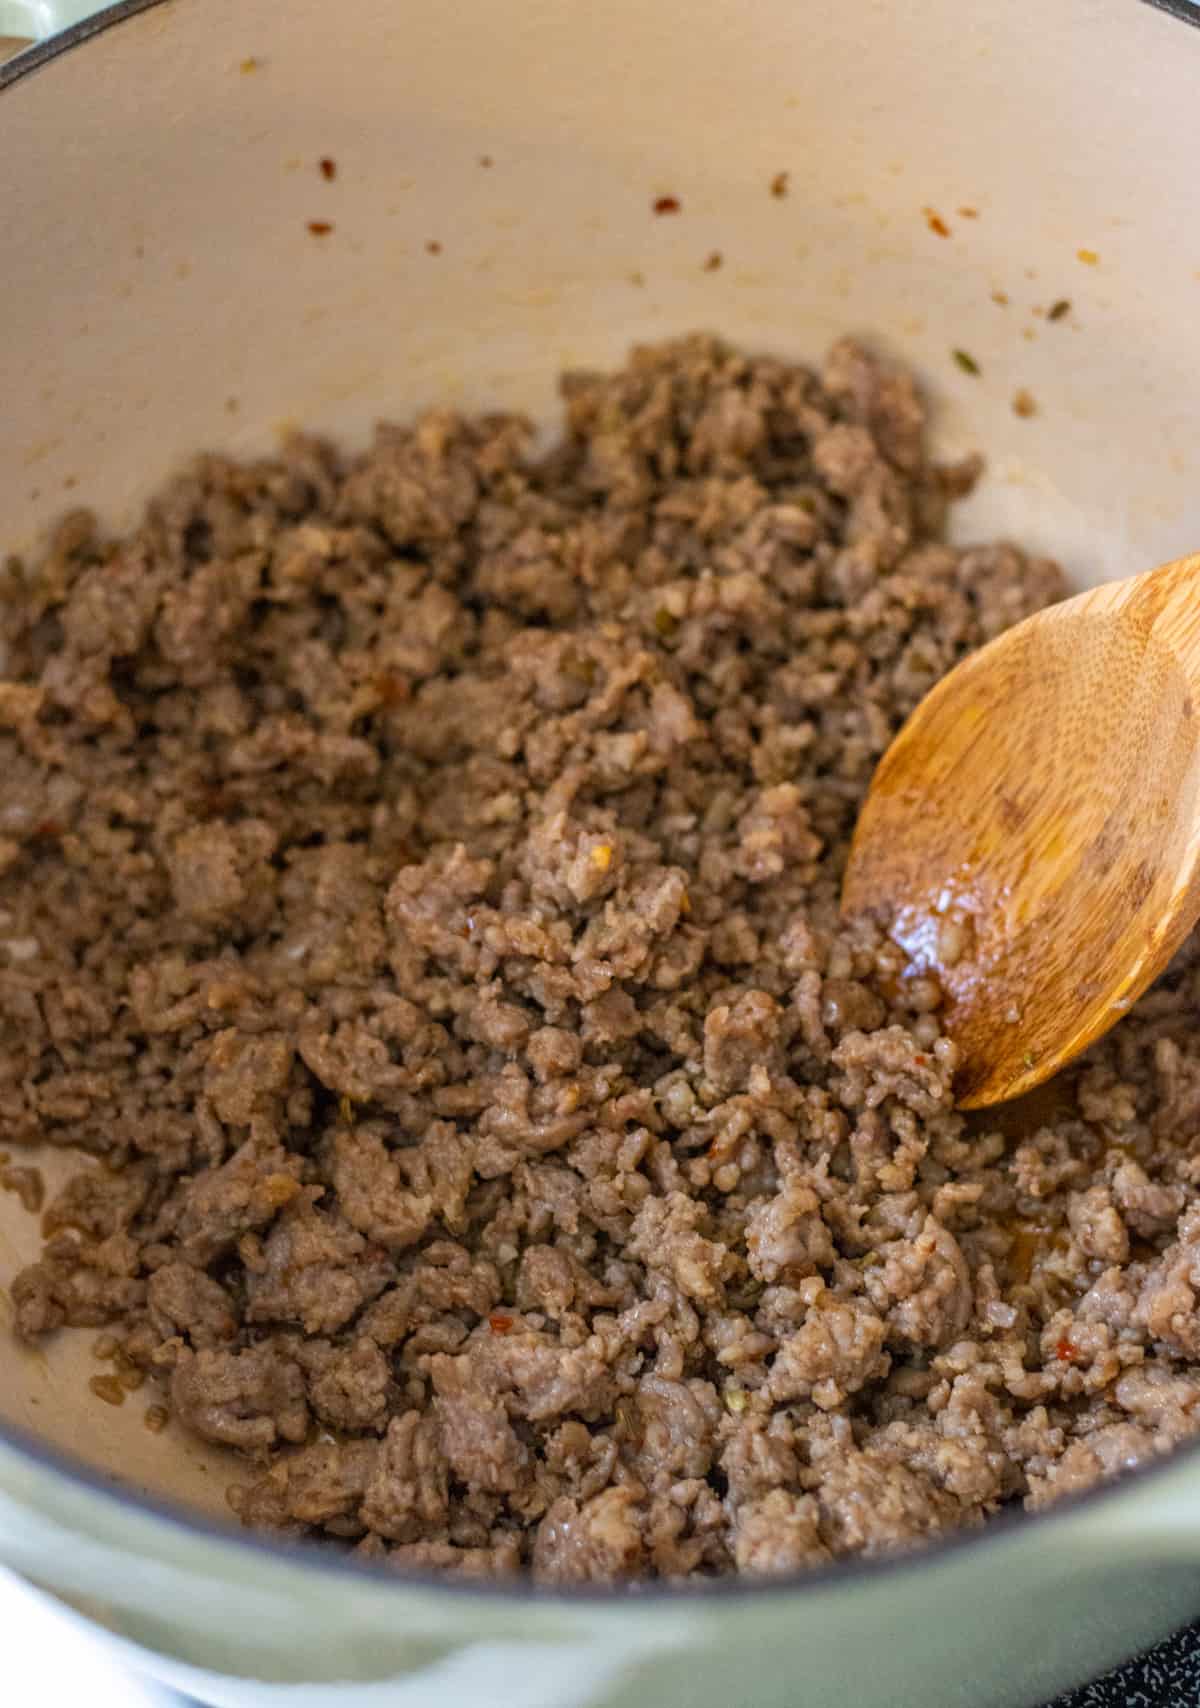 Cooked ground sausage in a pot with a wooden spoon.